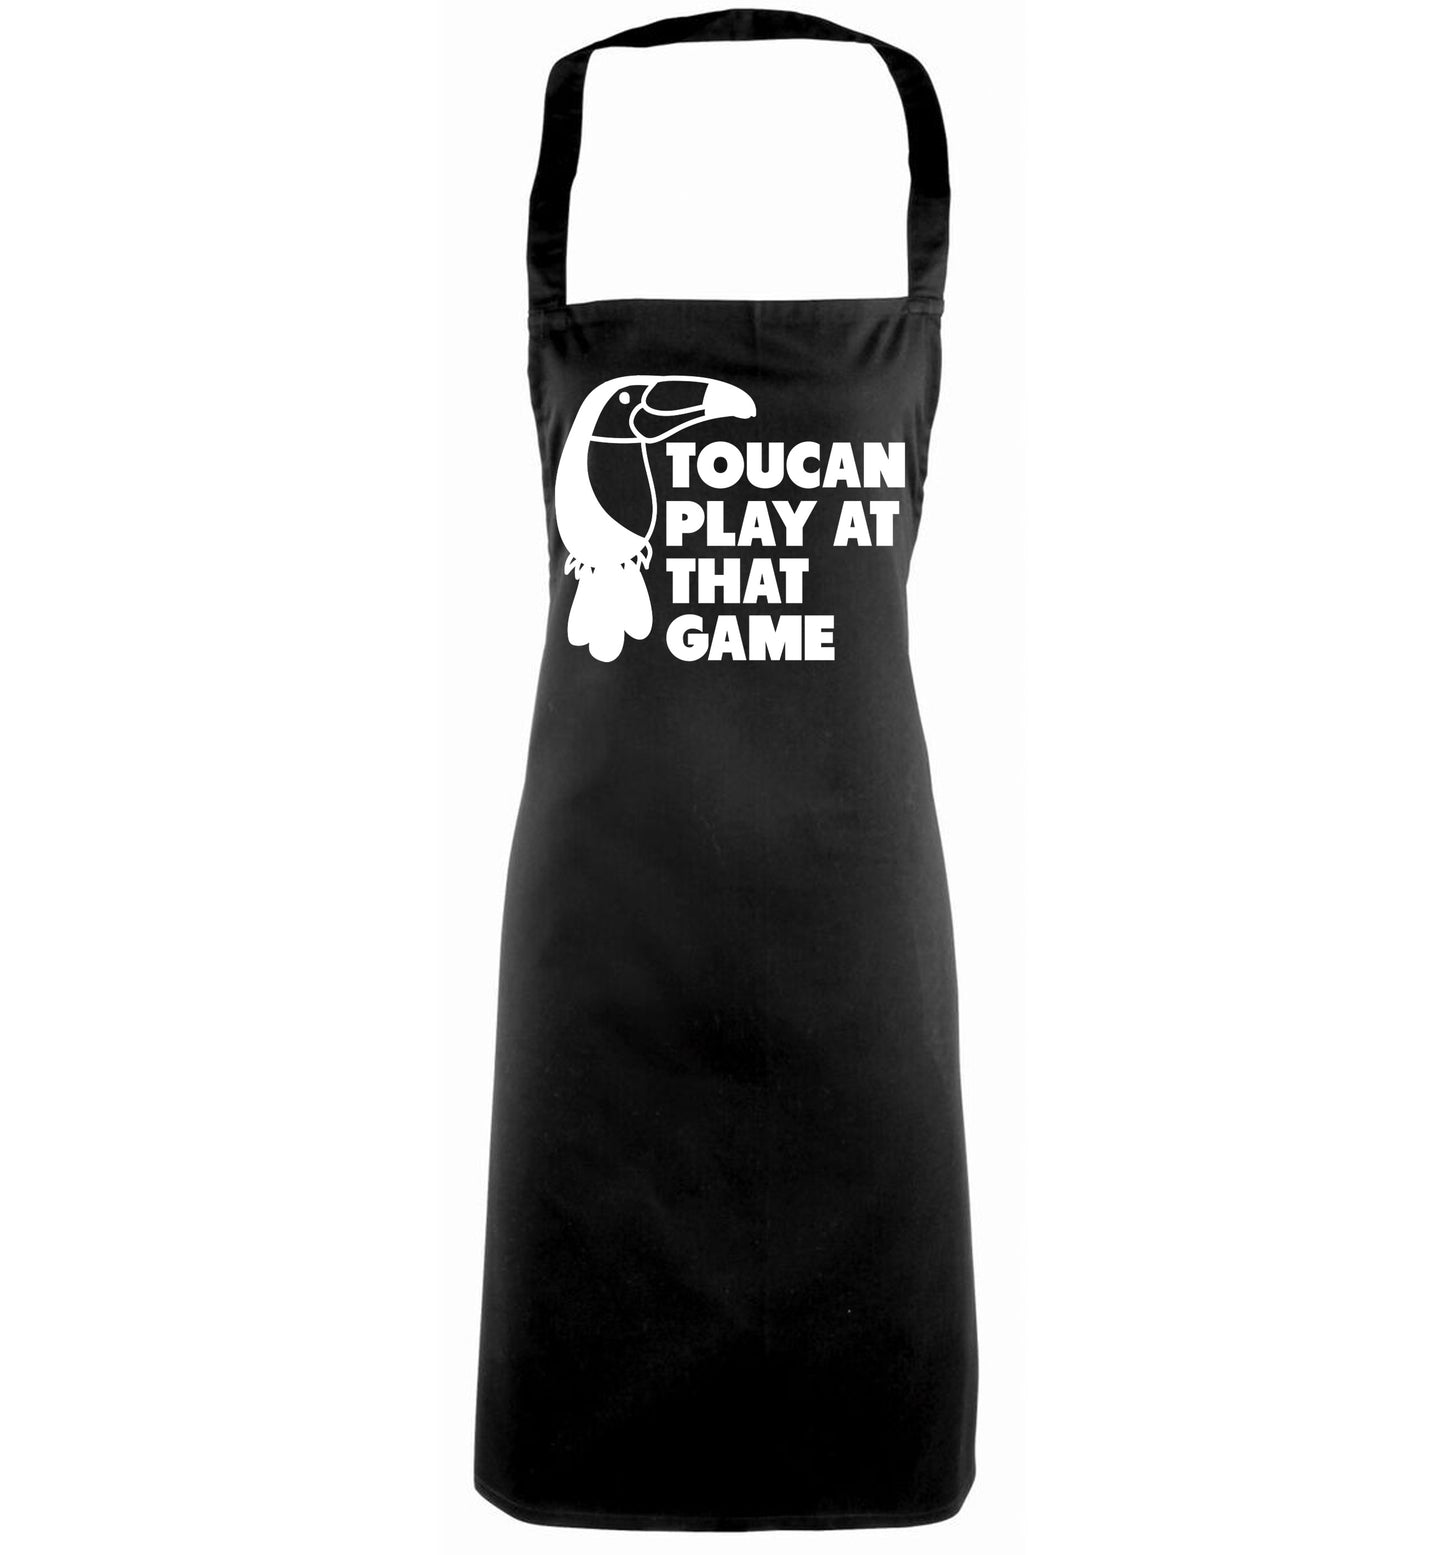 Toucan play at that game black apron